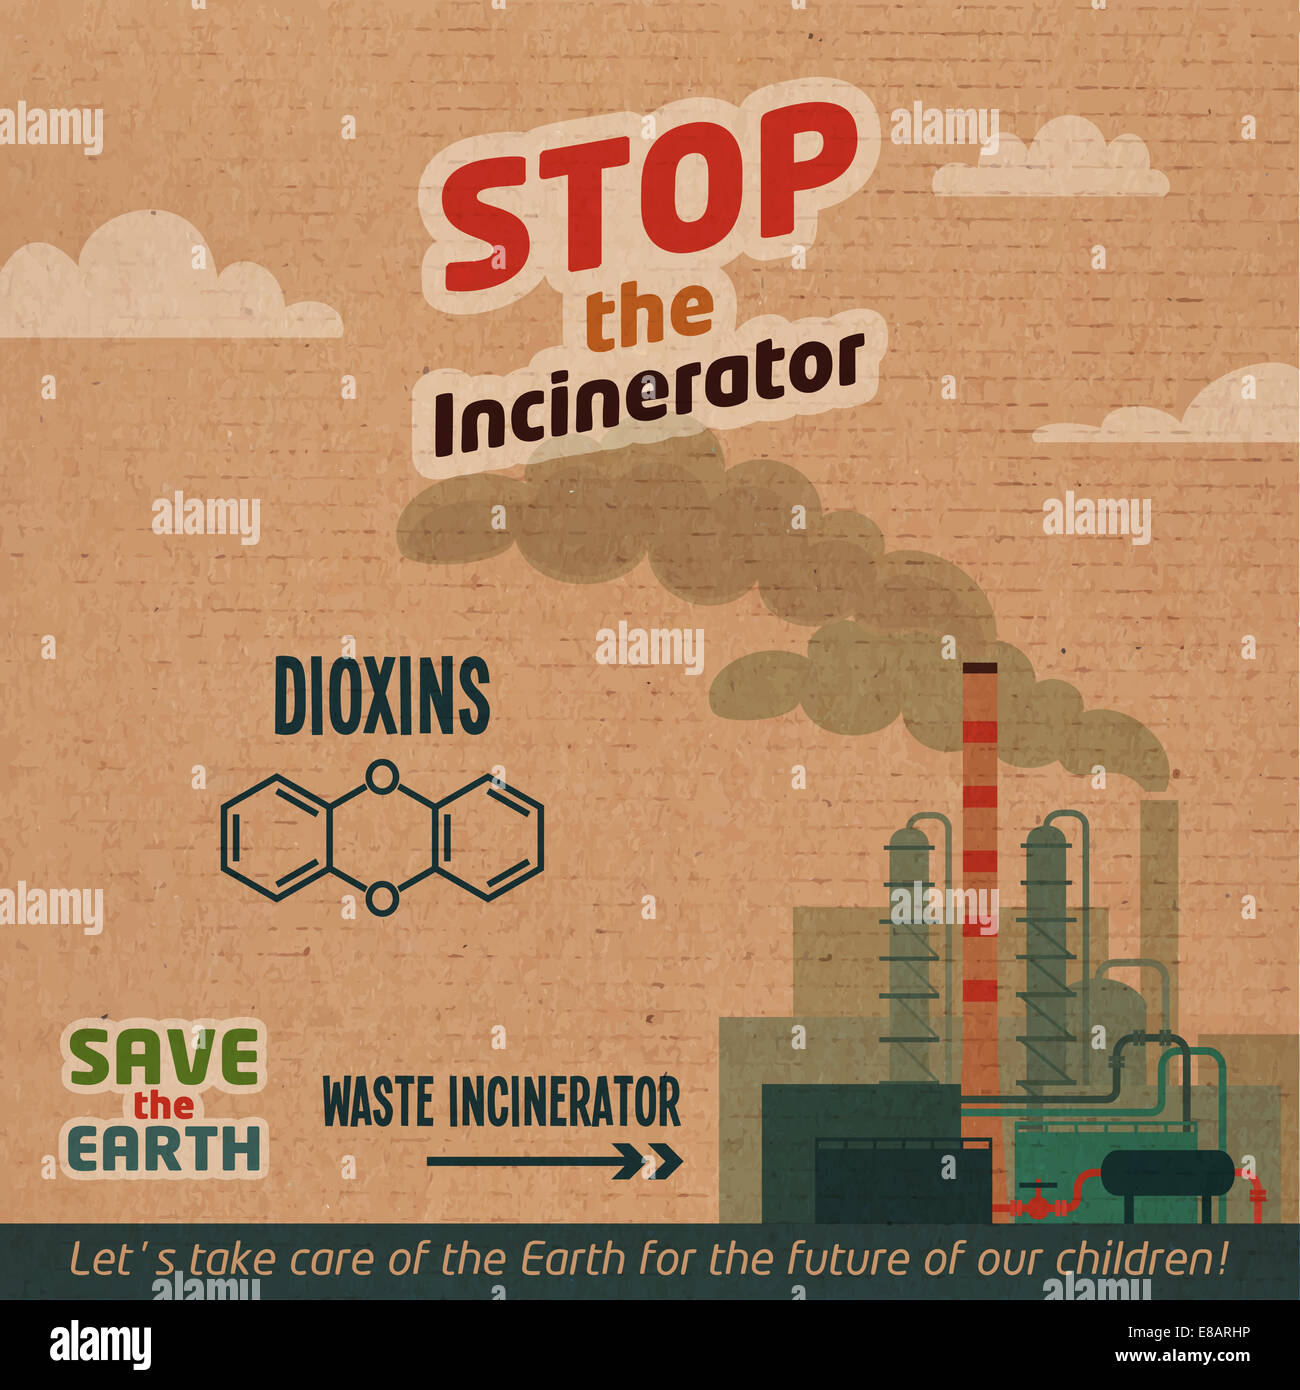 Stop incinerators. Waste incineration plants dioxin emissions. Save the Earth eco illustration on cardboard background Stock Photo